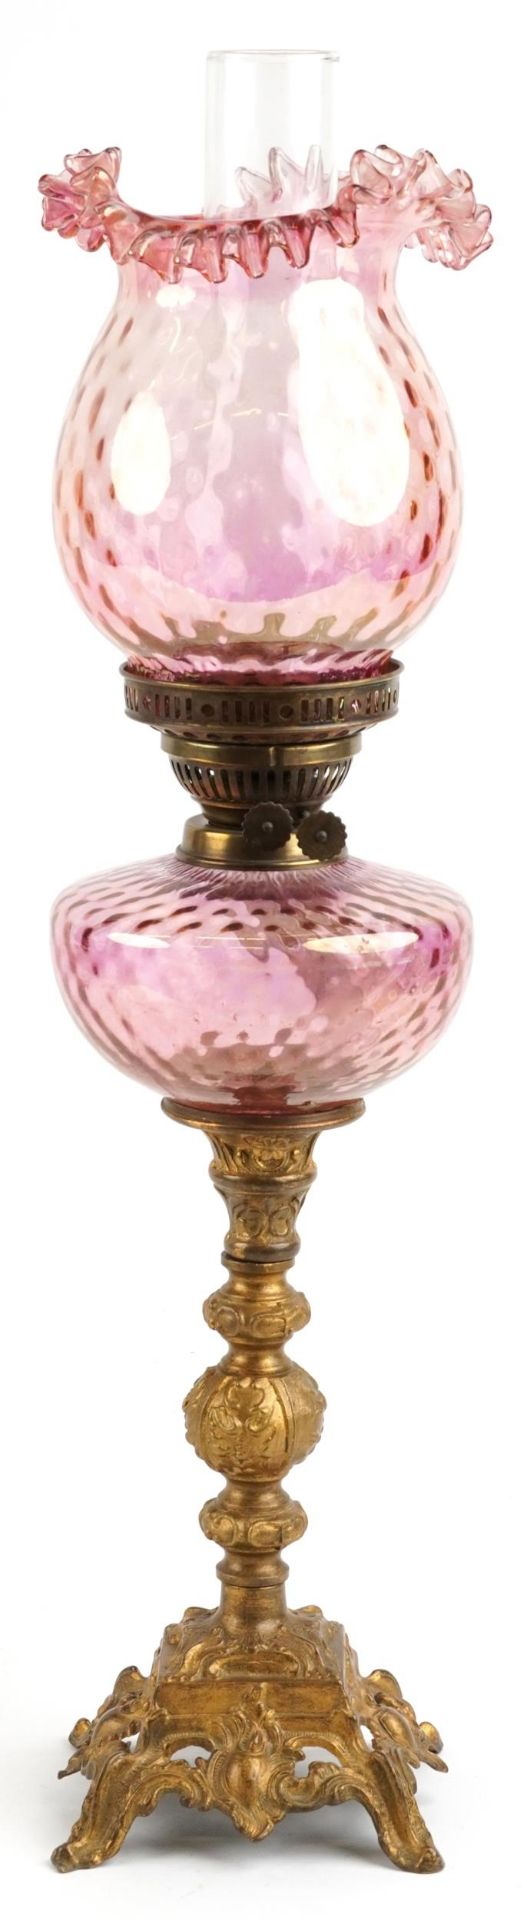 Ornate gilt painted oil lamp with iridescent cranberry glass shade and reservoir, 68.5cm high :